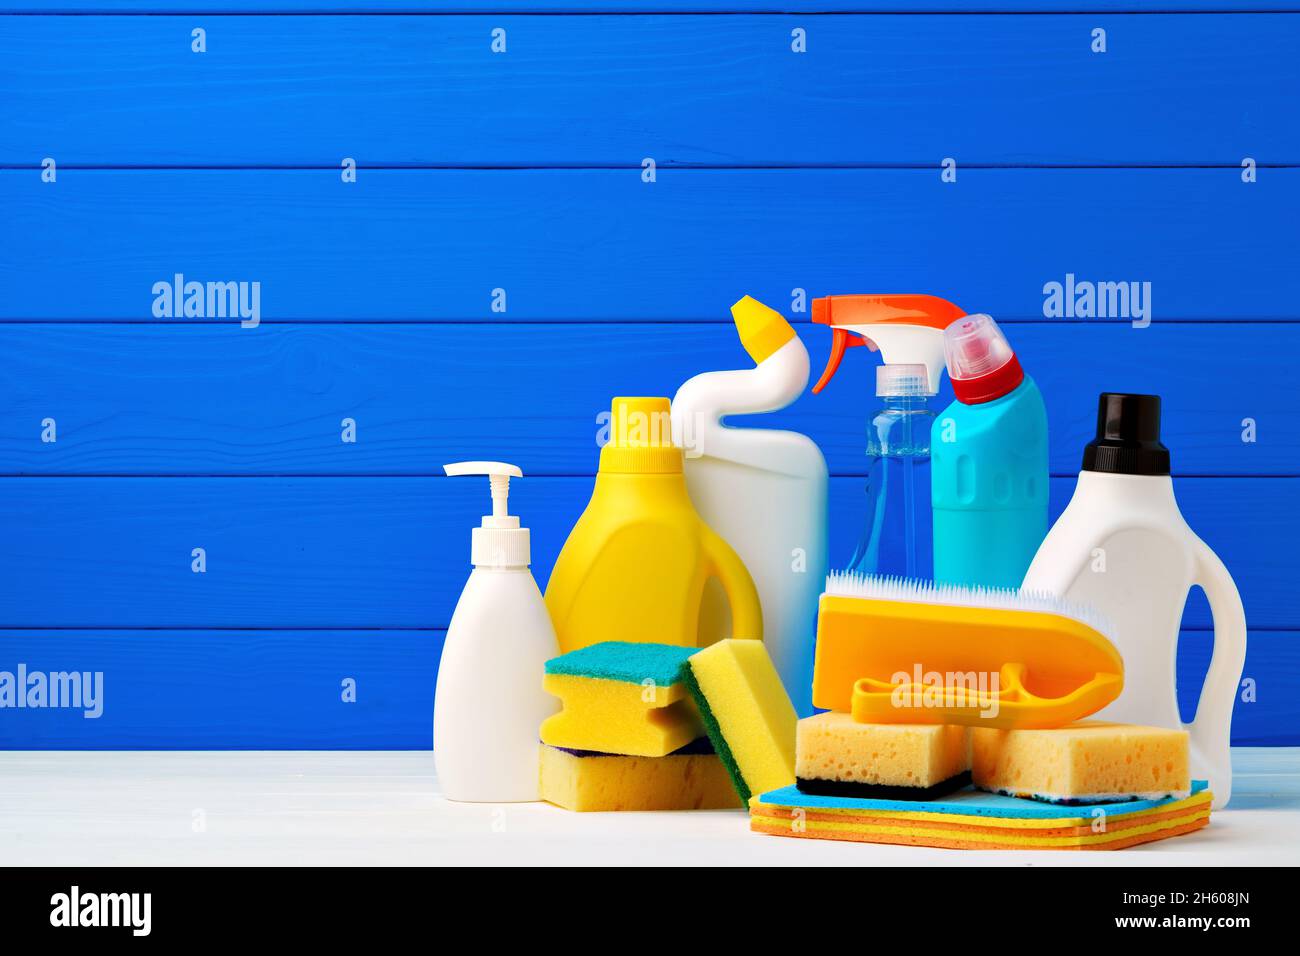 https://c8.alamy.com/comp/2H608JN/various-cleaning-items-against-blue-wooden-background-2H608JN.jpg